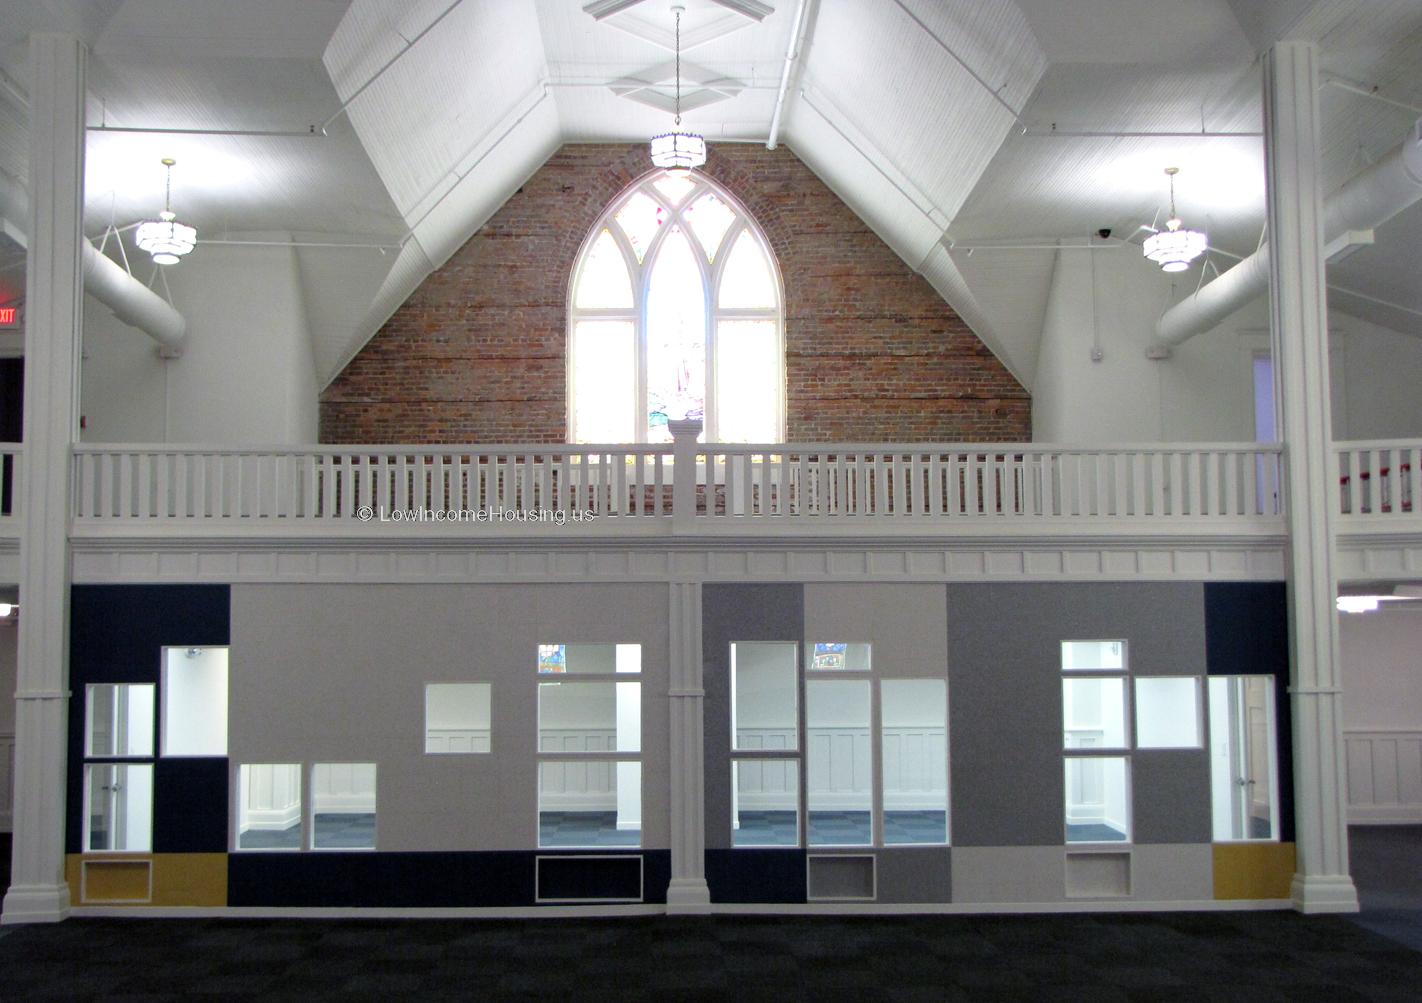 On the lower level the photograph shows a hall way which could be used for transaction processing. The upper level could be used for work in process. 
